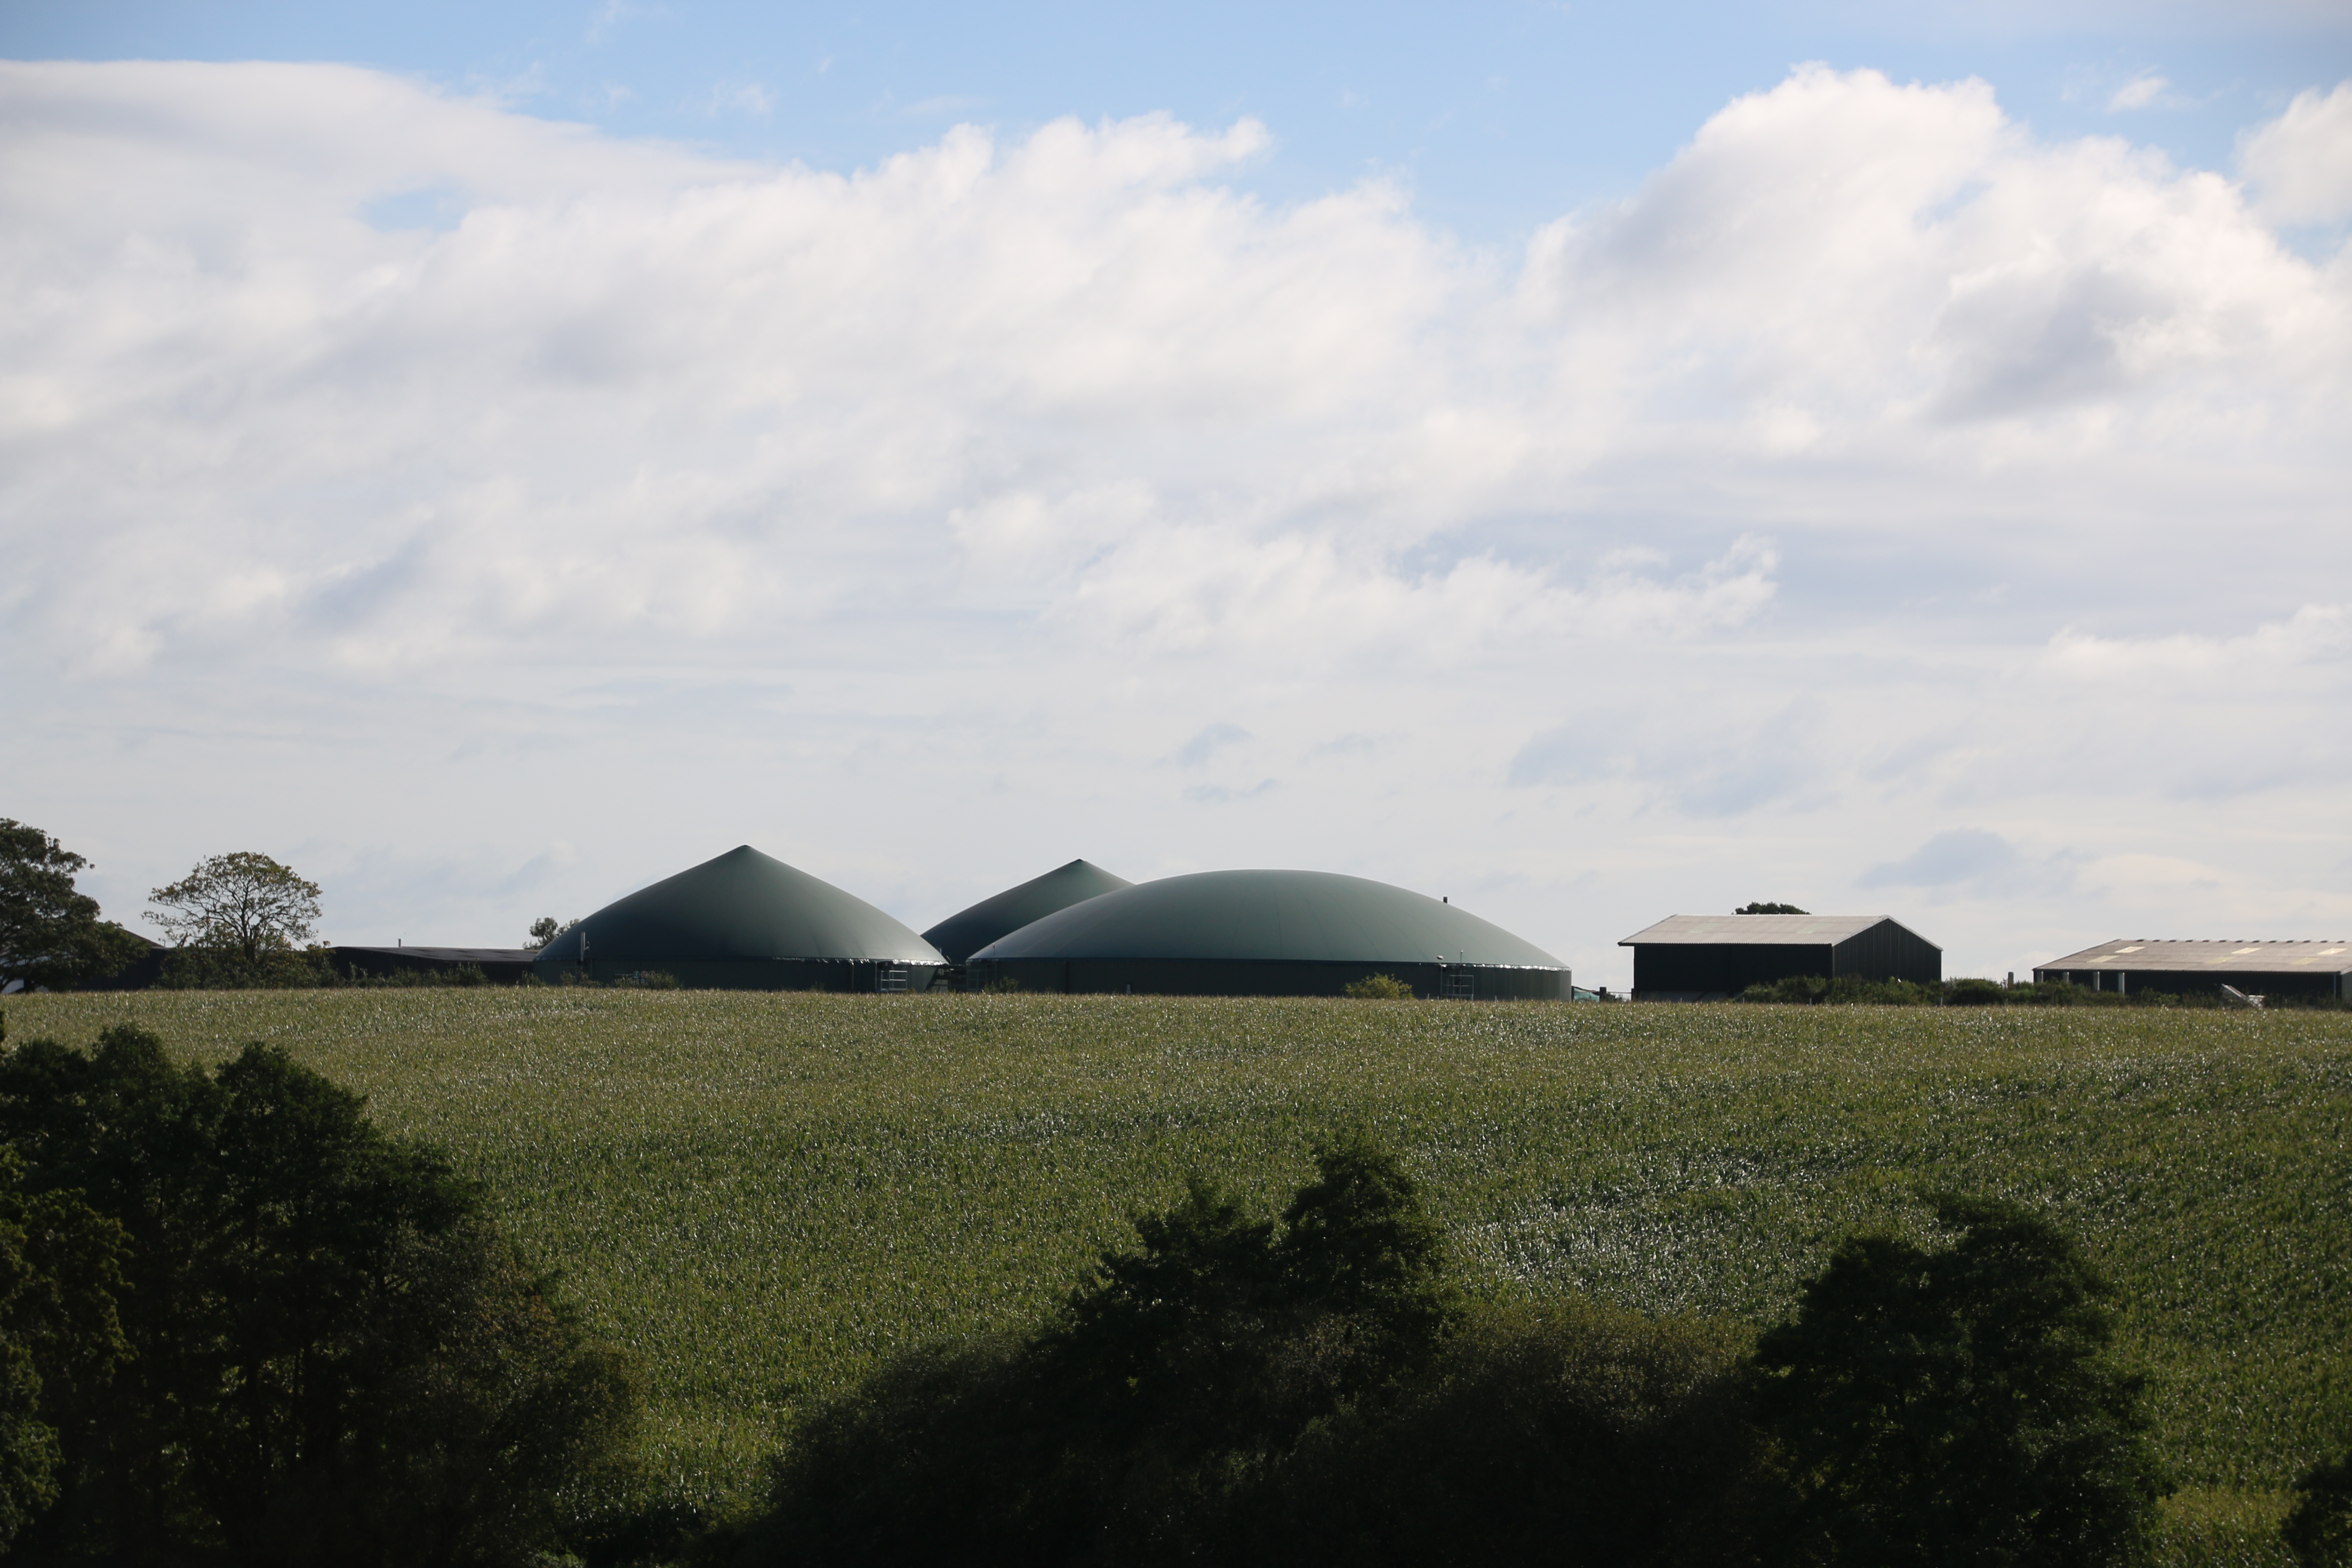 Maize-and-Biogas-Plant-Lydney.jpg